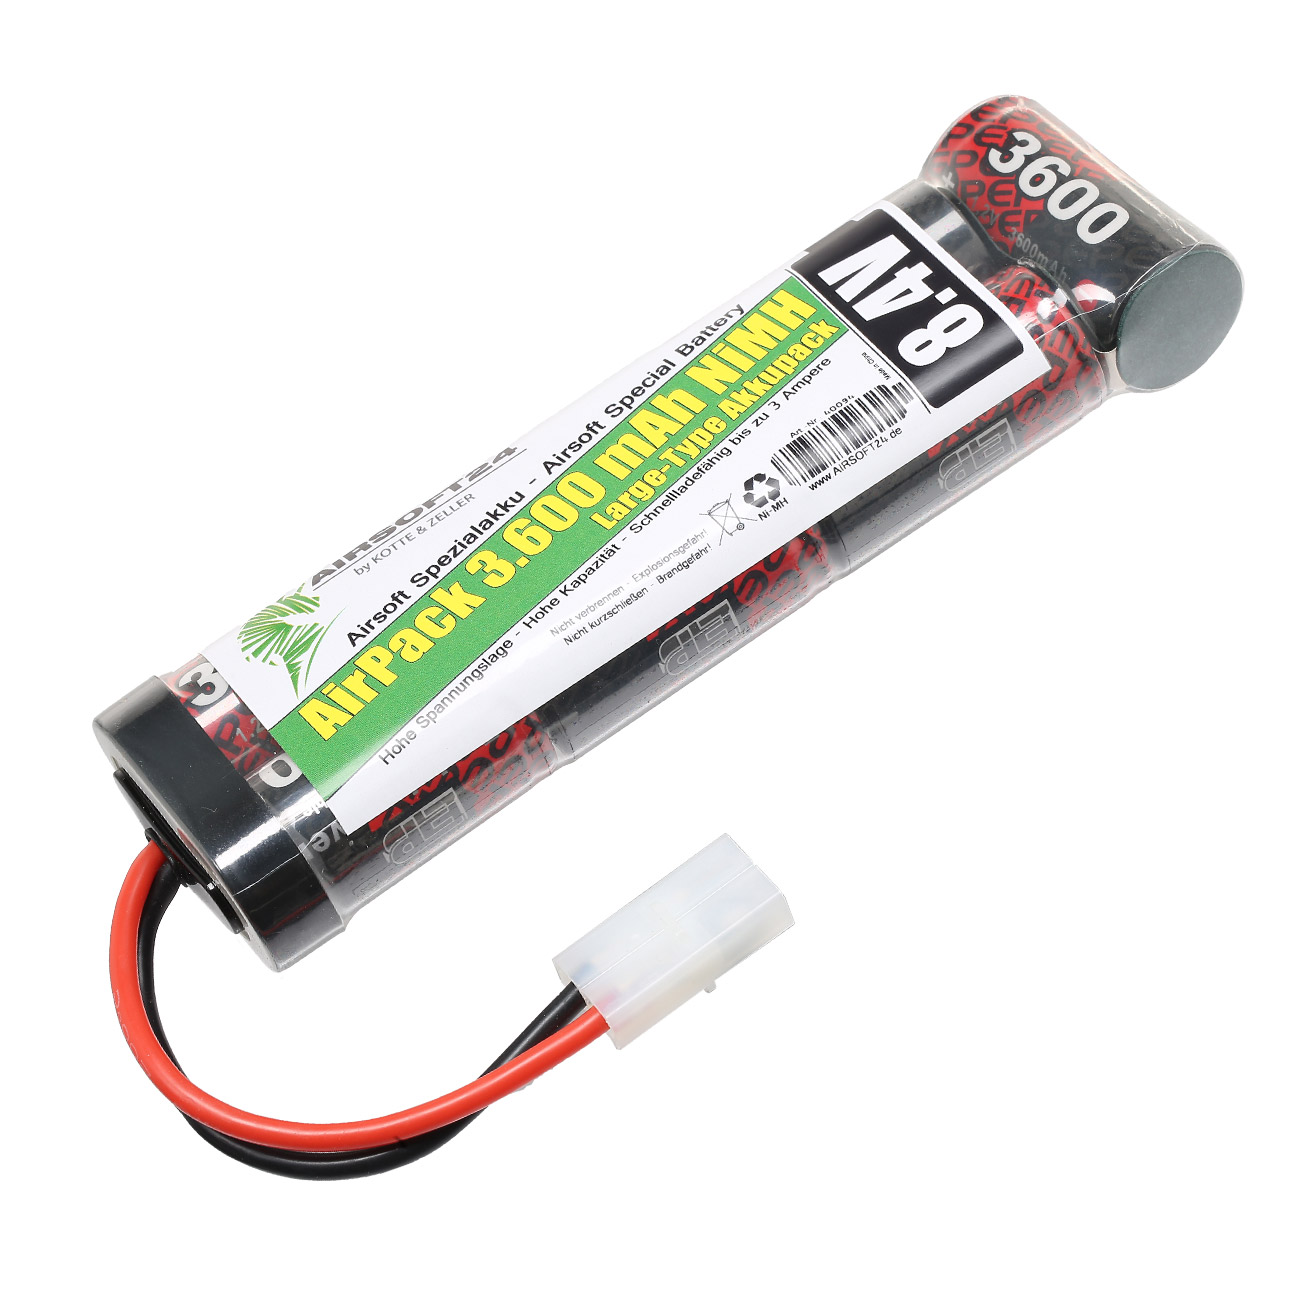 Airsoft24 AirPack Akku 8.4V 3600mAh NiMH Large-Type mit TAM Anschluss